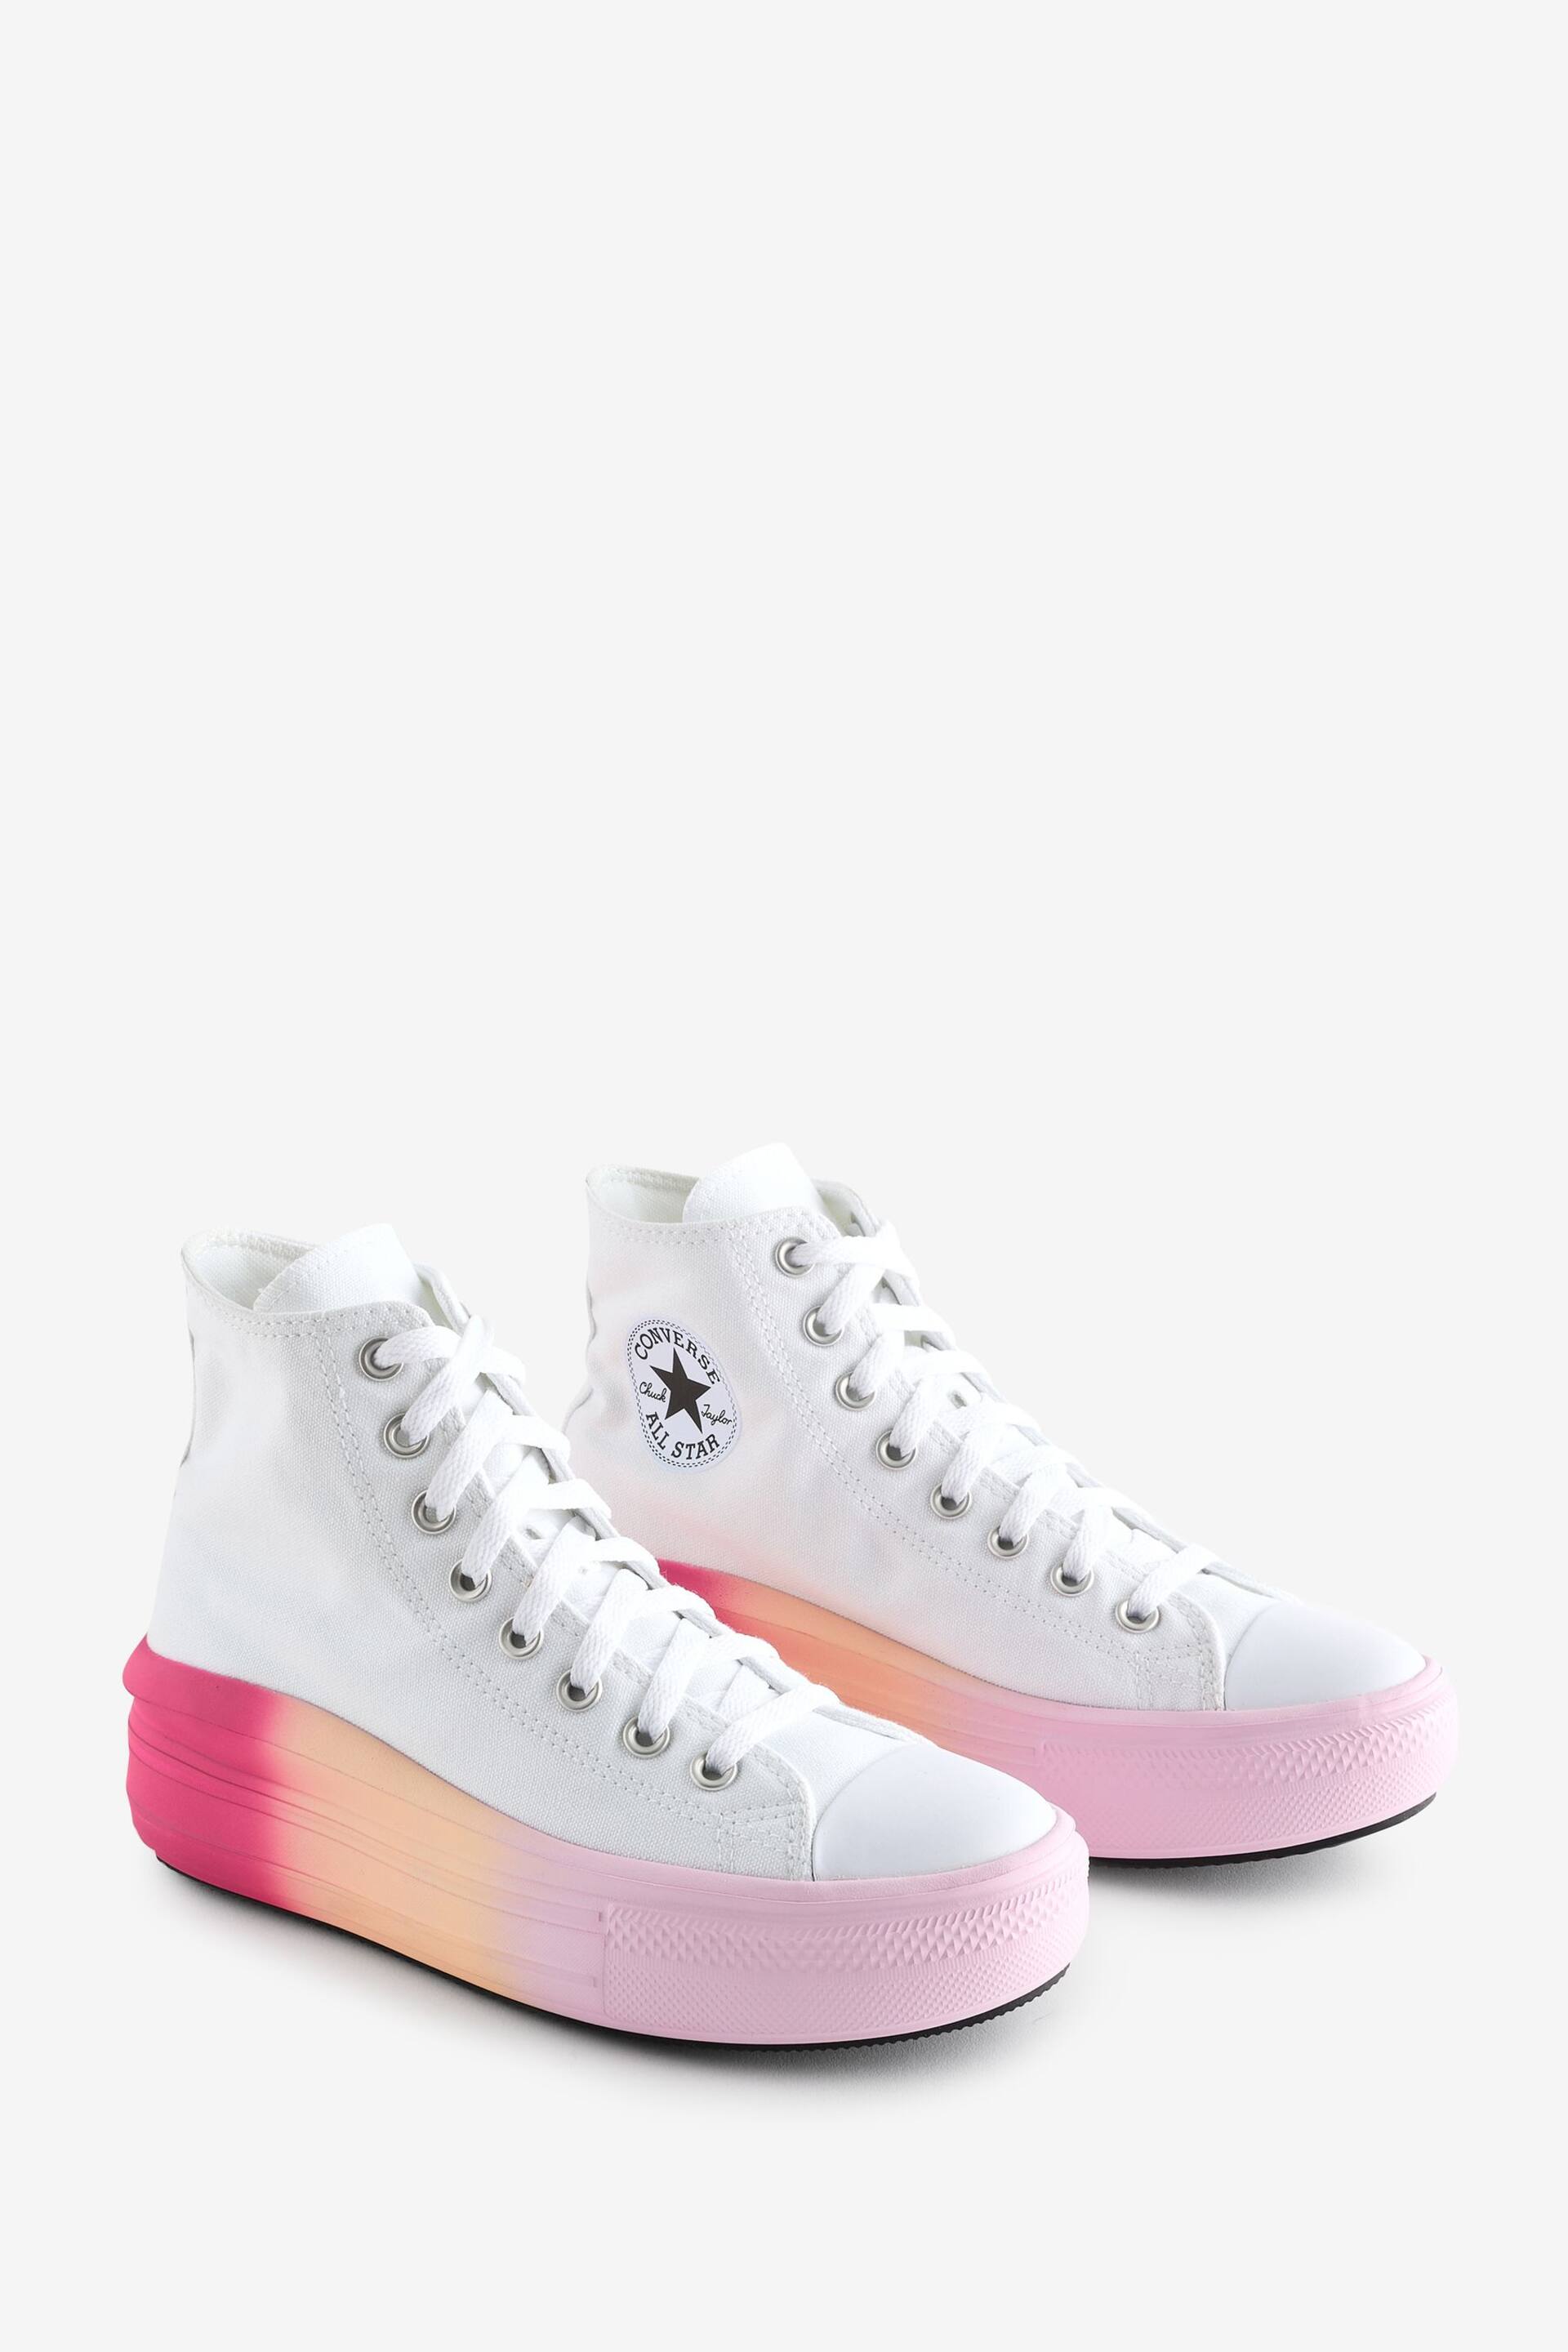 Converse White Ombre Move Platform Youth Trainers - Image 3 of 9